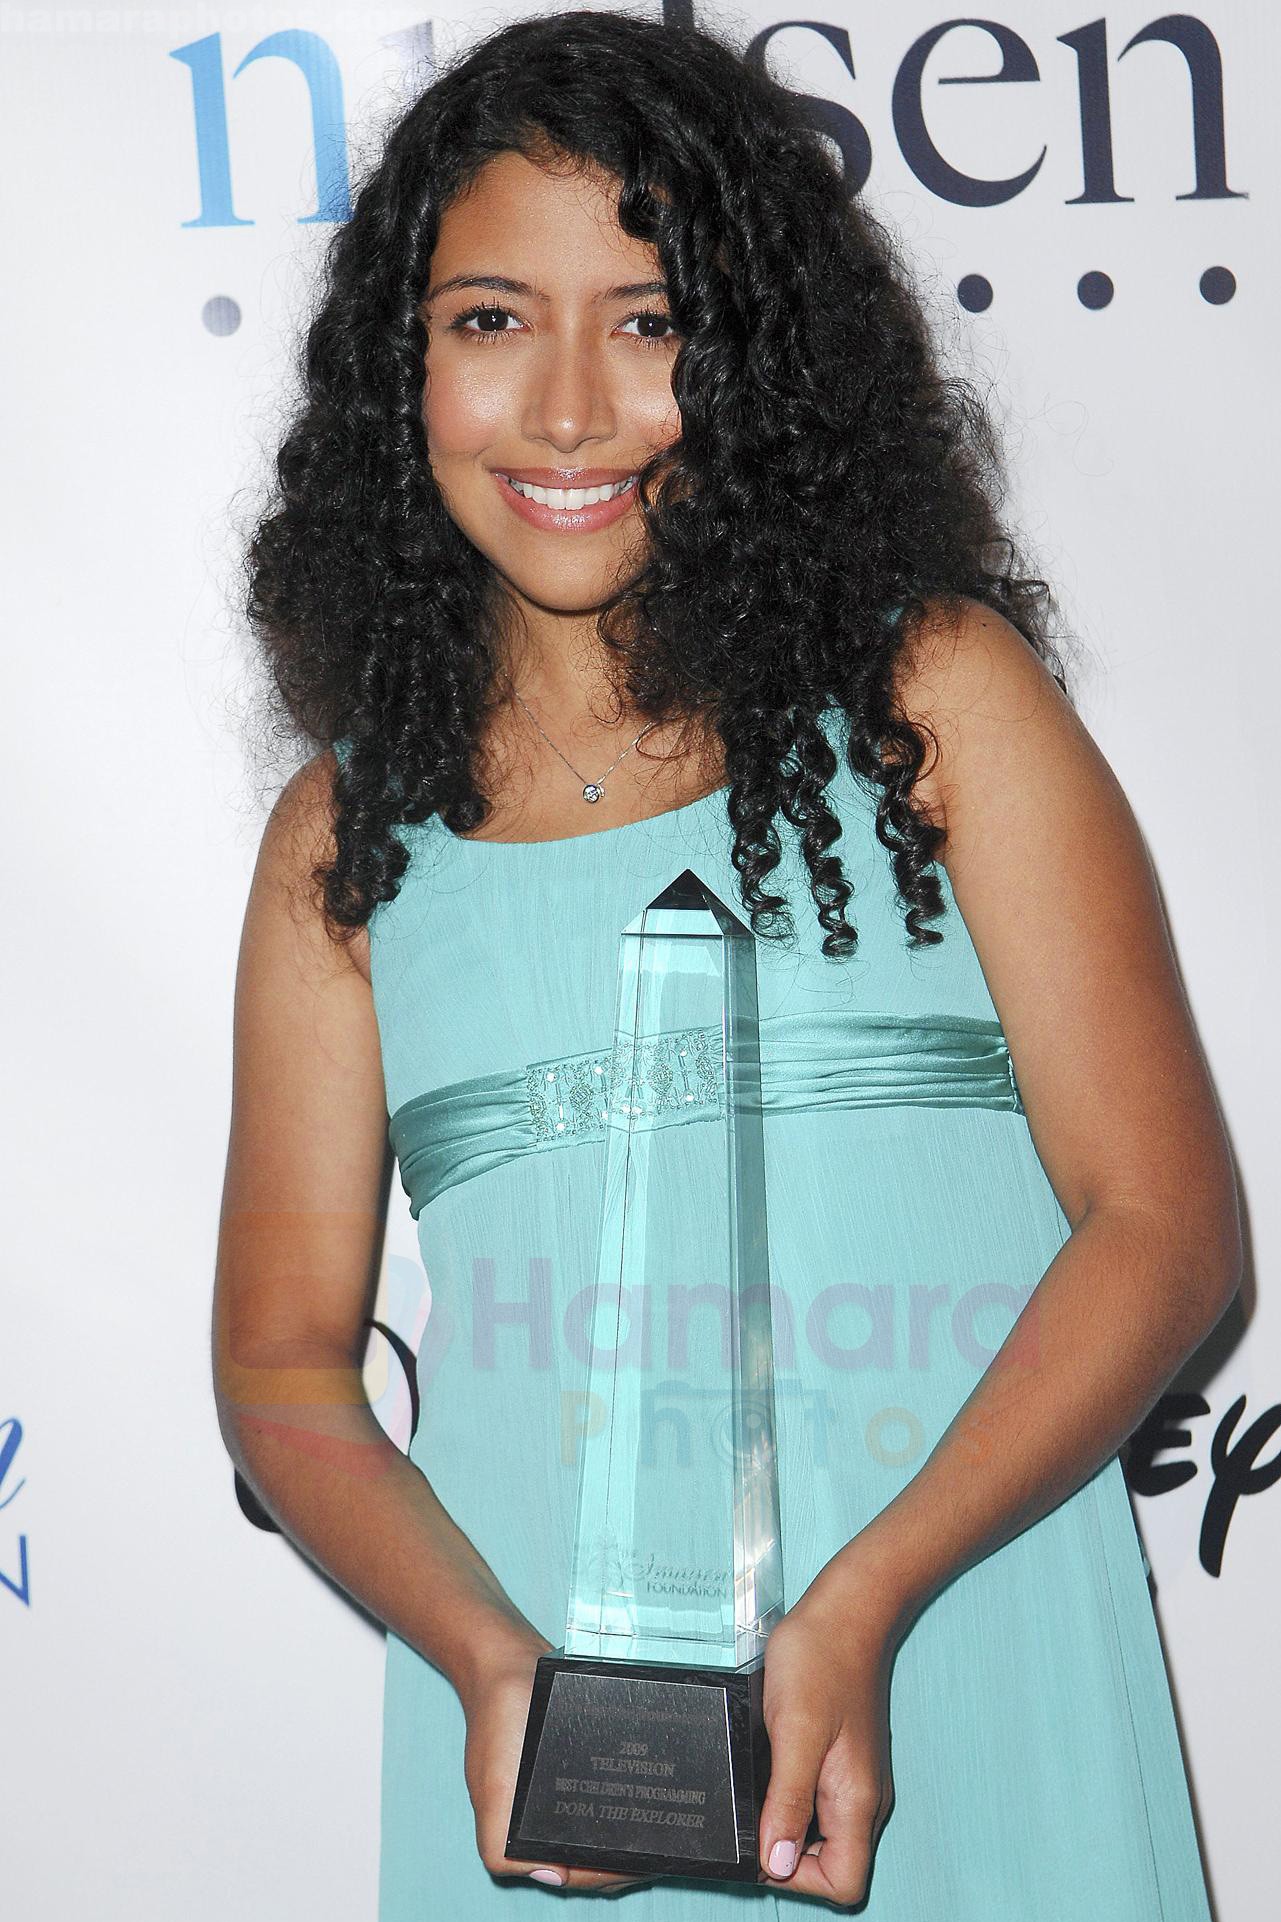 Catlin Sanchez at the 24th Annual Imagen Awards held at the Beverly Hilton Hotel Los Angeles, California on 21.08.09 - IANS-WENN